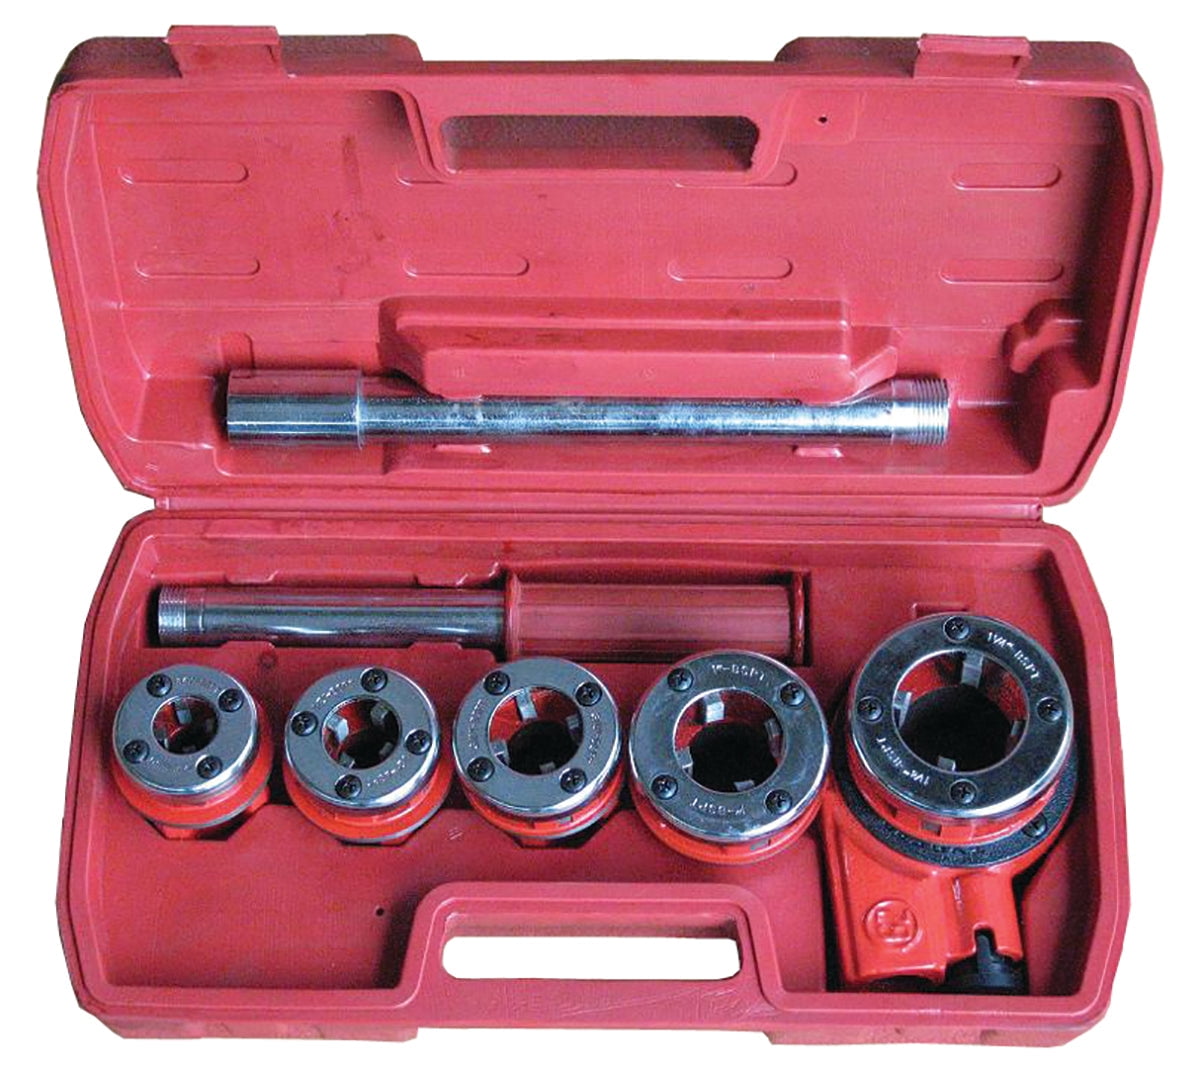 PIPE THREADER RATCHET TYPE WITH 5 DIES AND PIPE CUTTER PLUMBING HAND TOOLS SET 